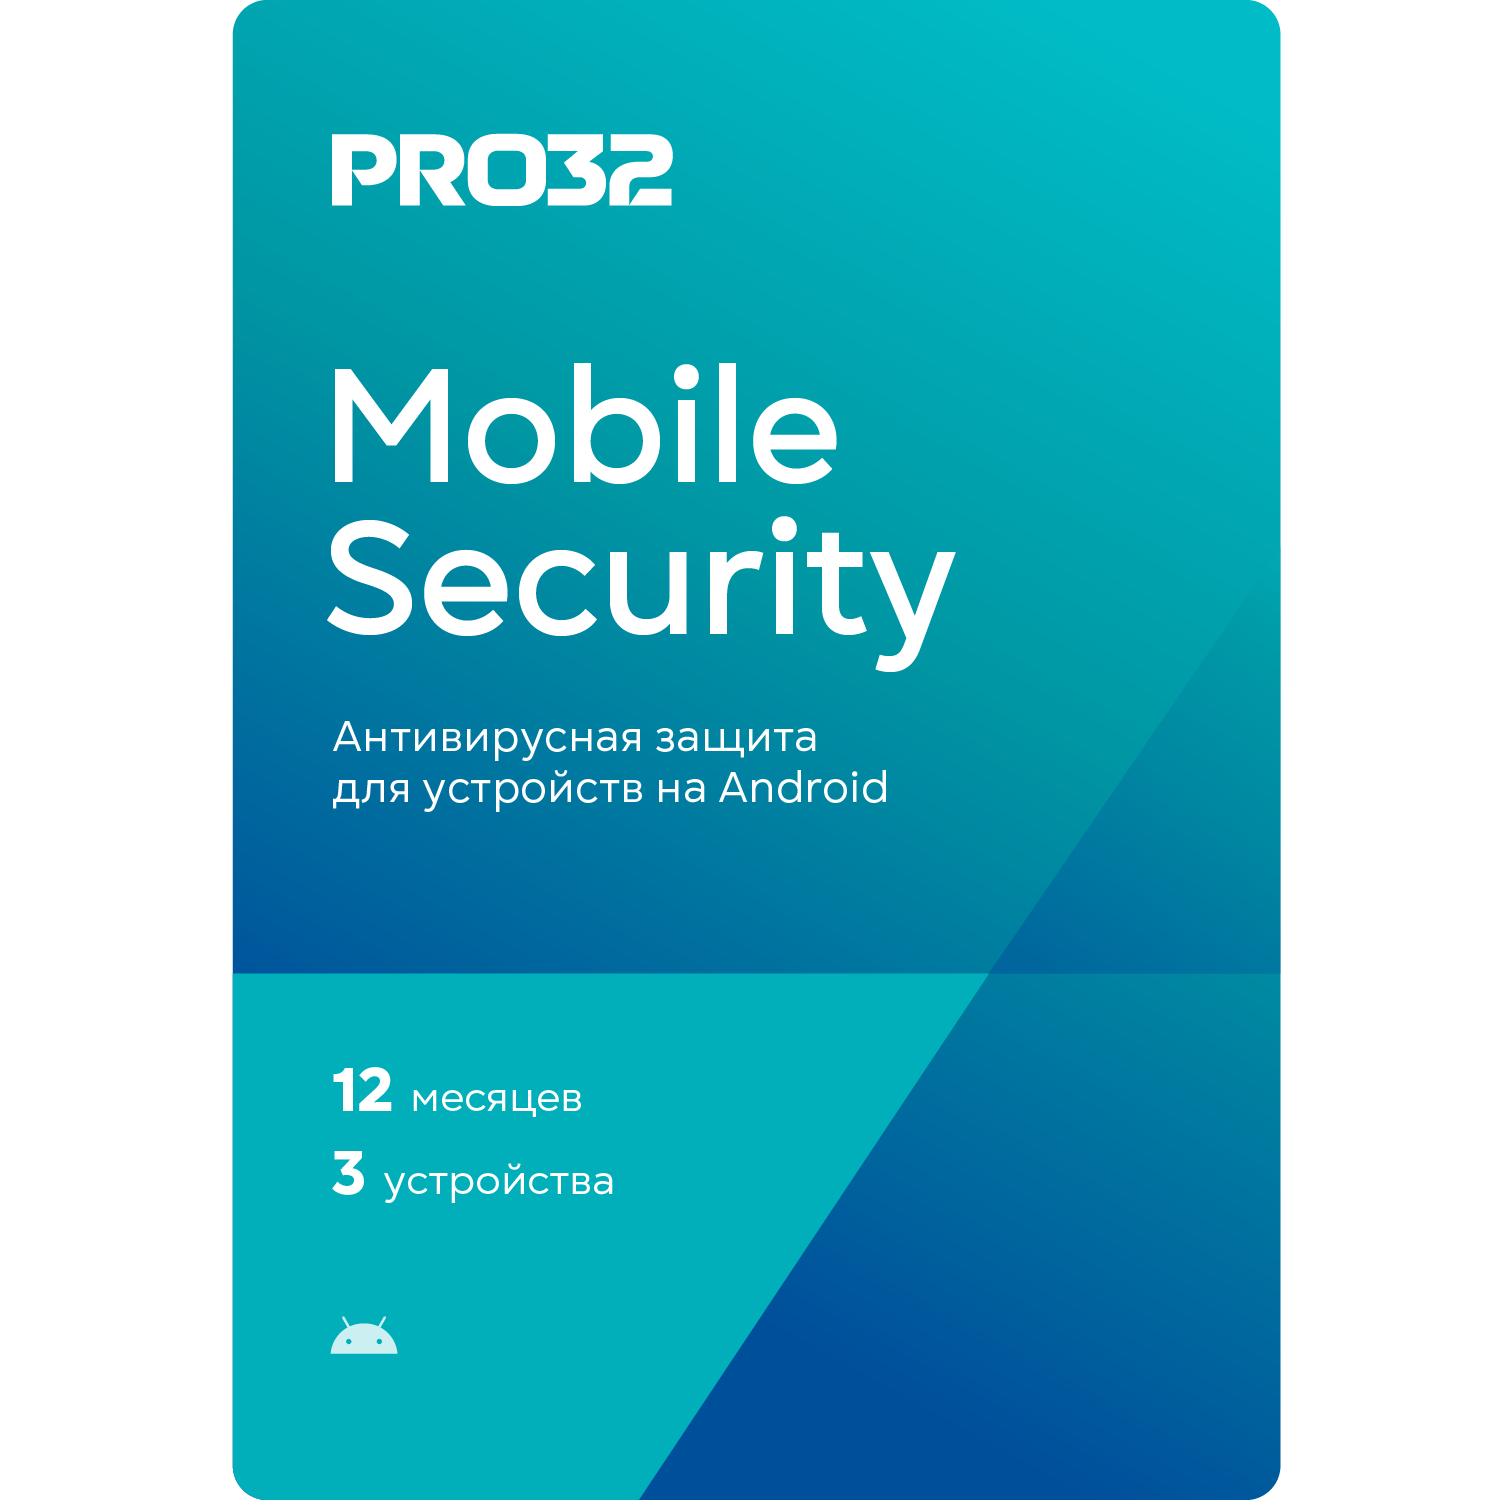 Pro32 Mobile Security